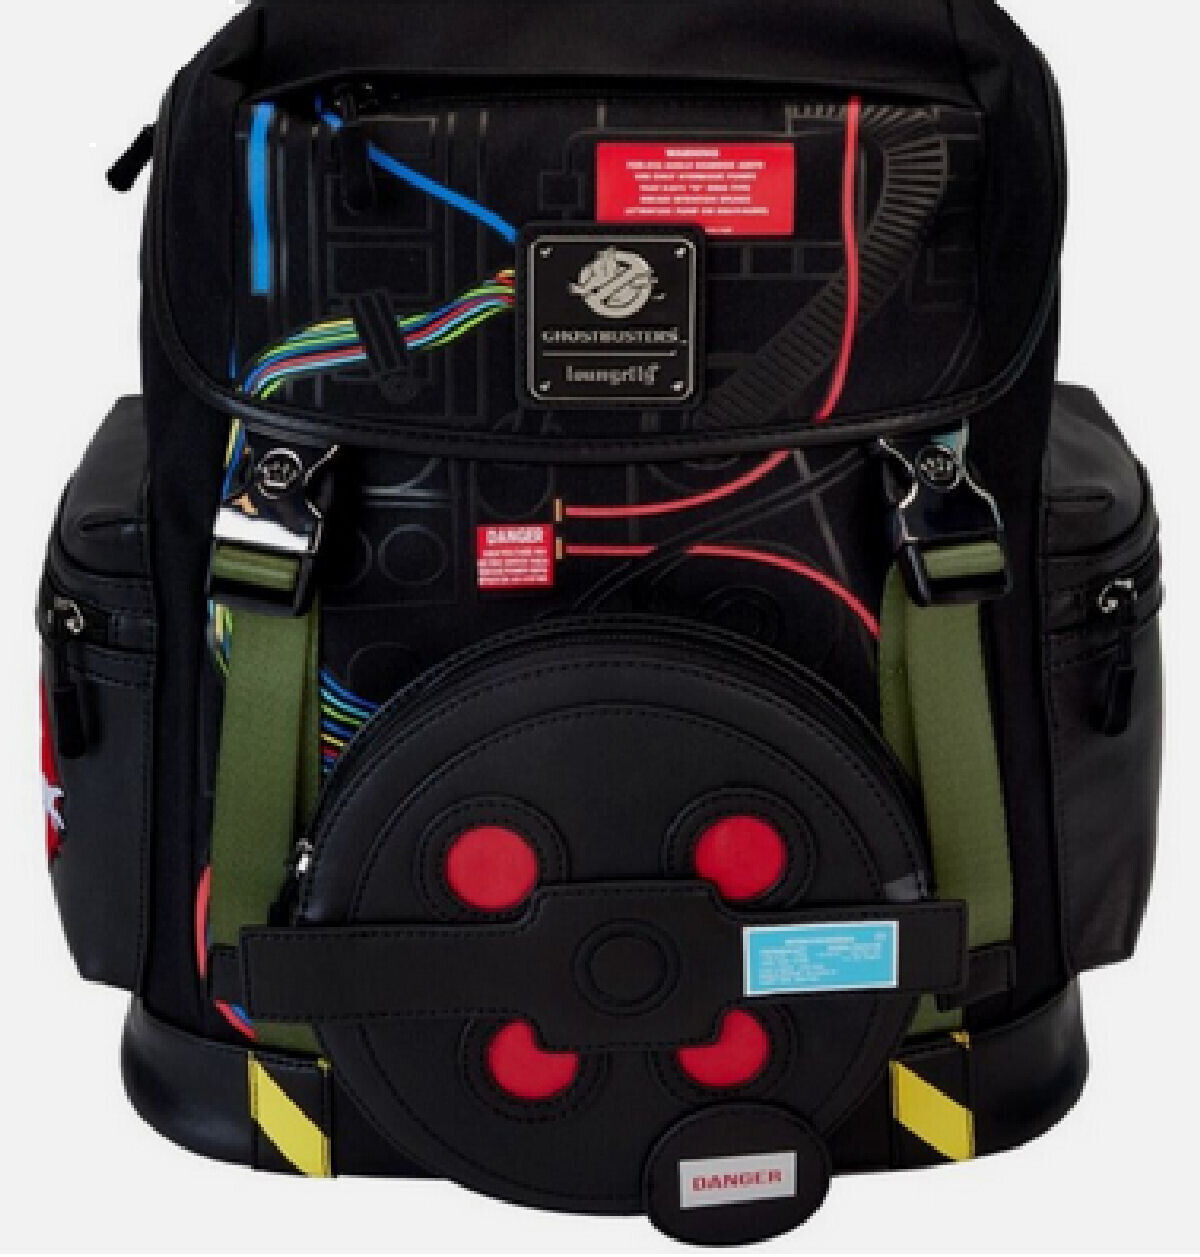 GHOSTBUSTERS BACKPACK AMC - Limited to 1000 Loungefly Proton Pack Full Size NWT